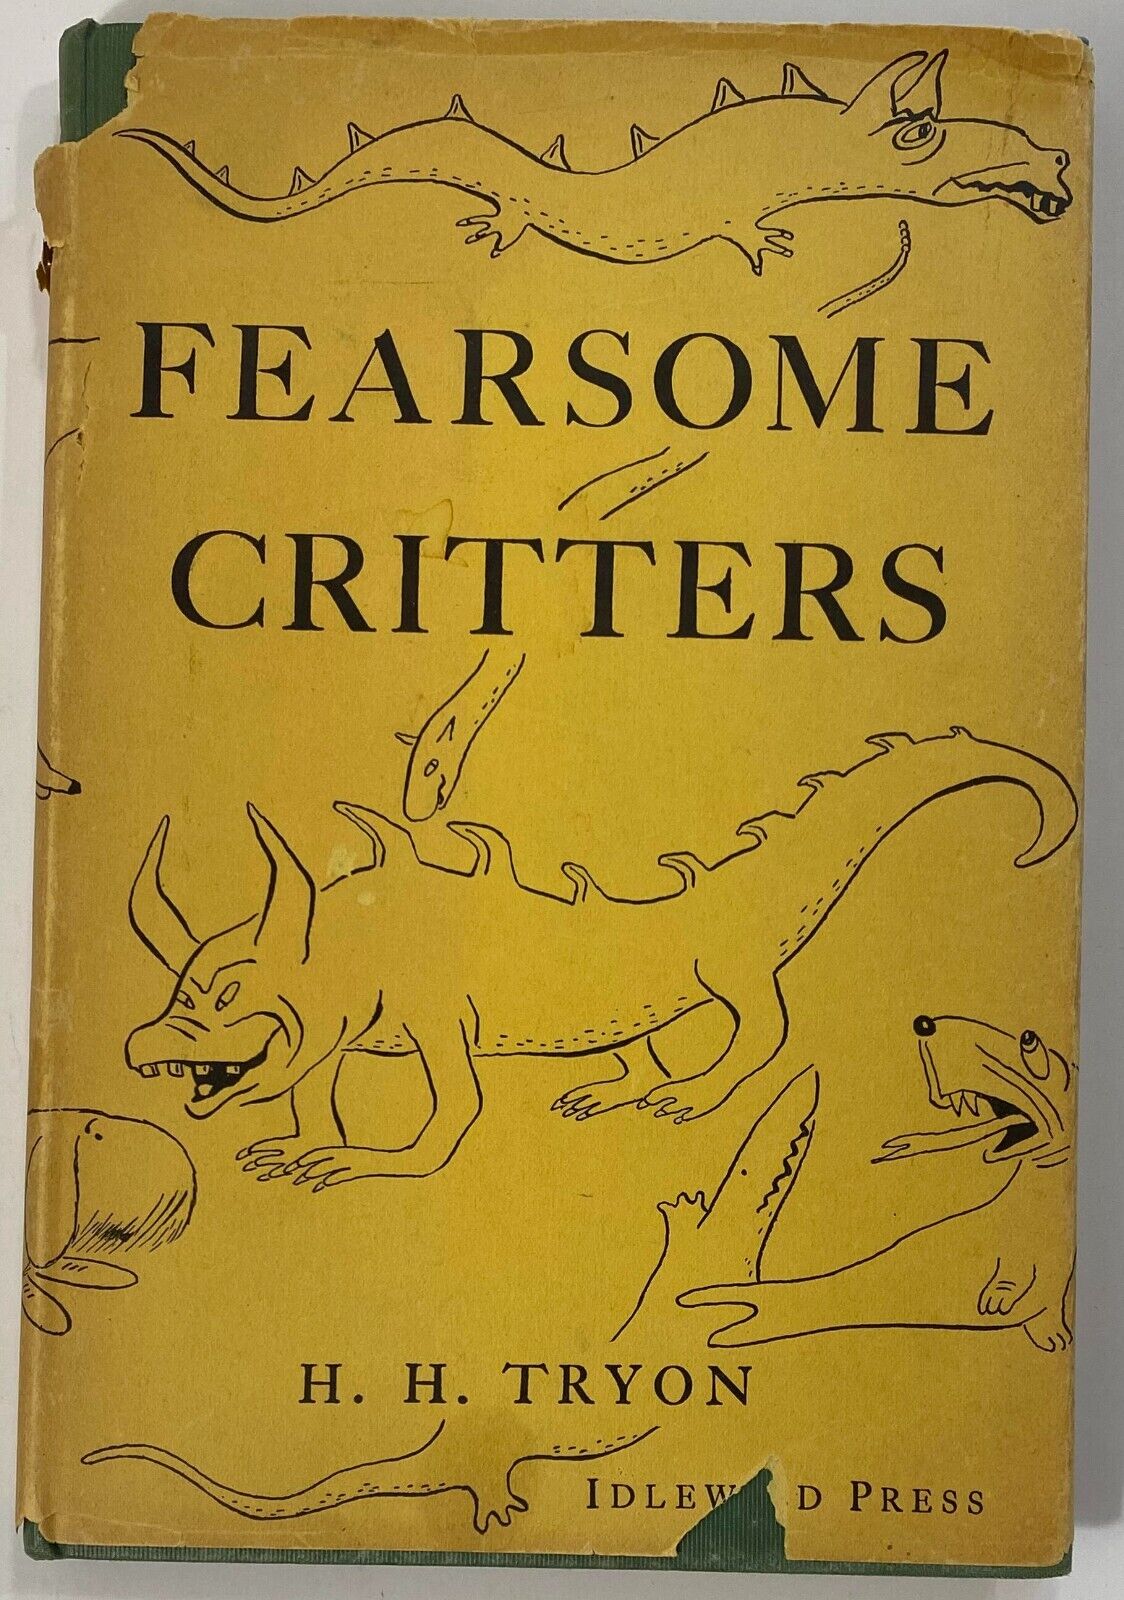 Vintage Fearsome Critters By Henry H. Tryon 1939 hardcover